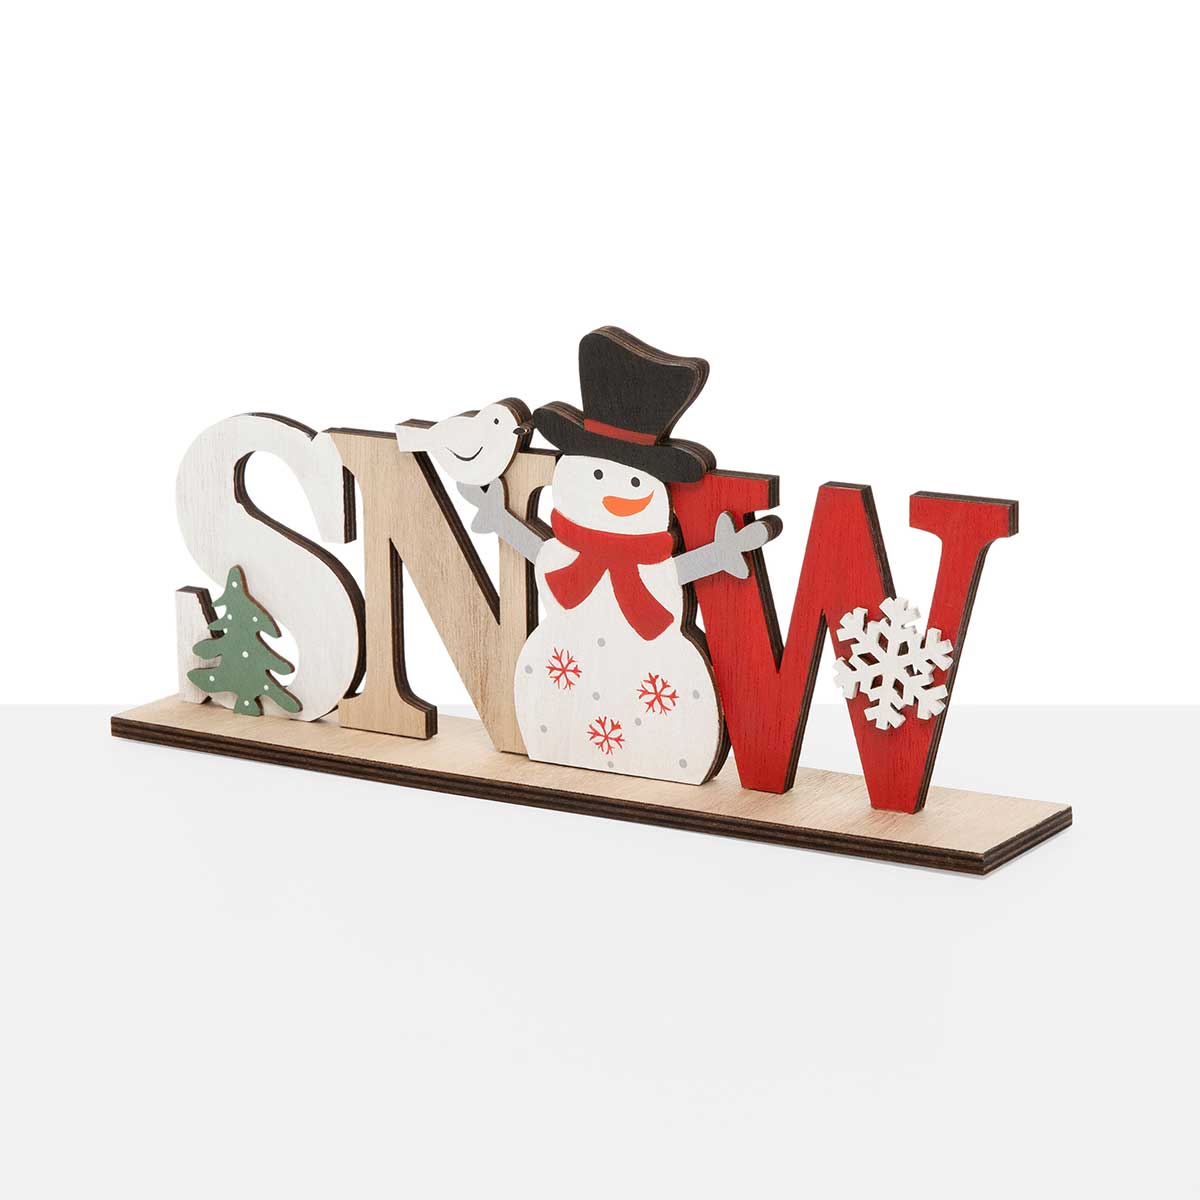 SIT-A-BOUT SNOW WITH SNOWMAN 10.25IN X 2IN X 4.75IN WHITE/RED